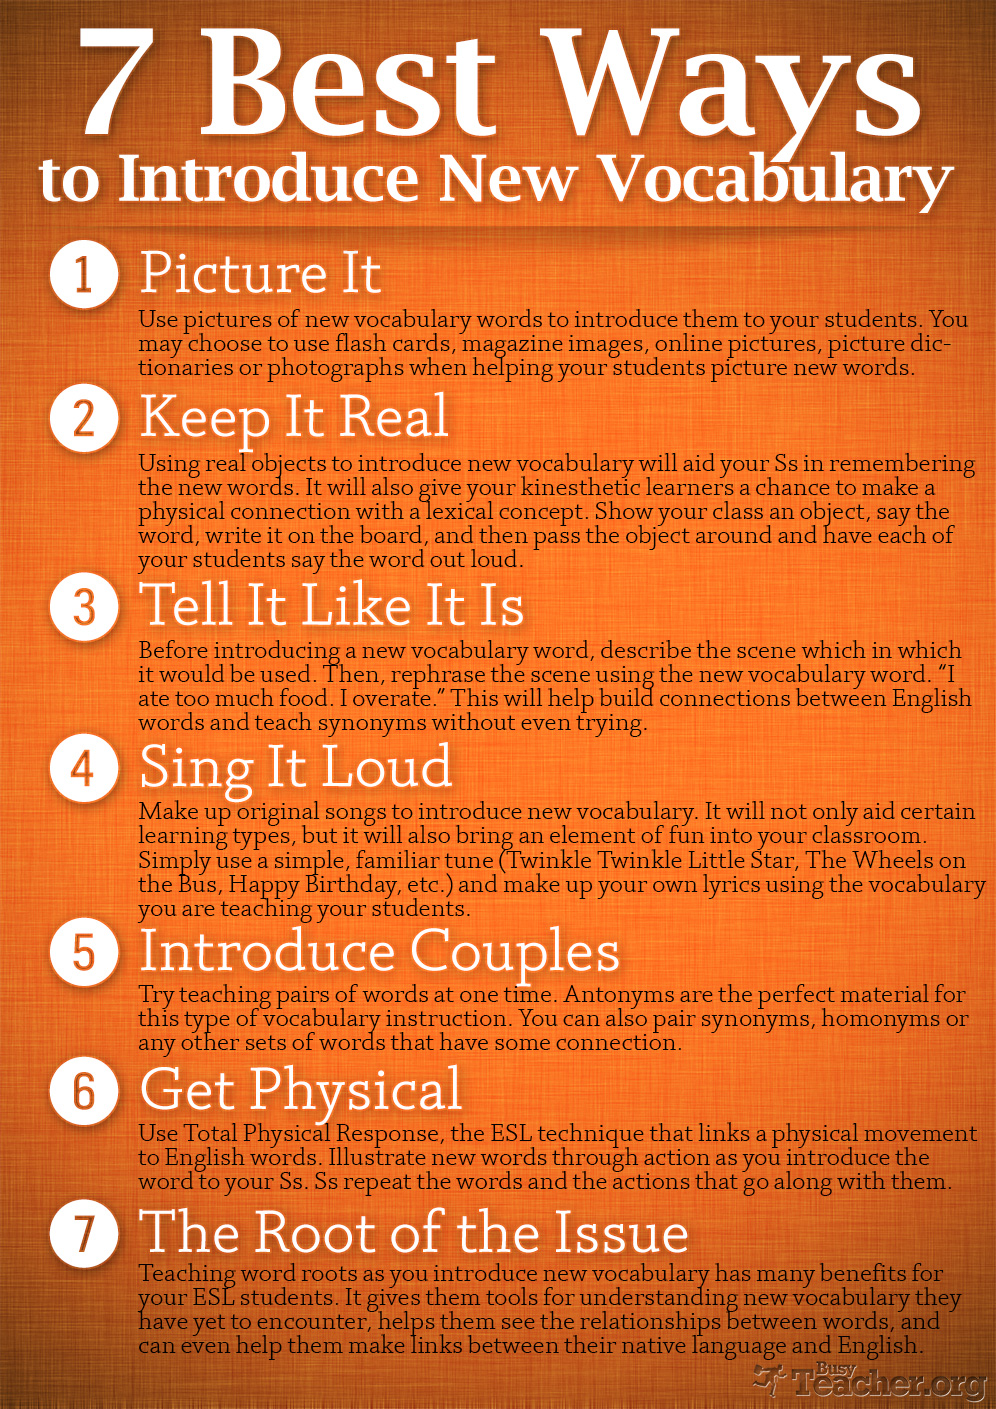 POSTER: 7 Best Ways to Introduce New Vocabulary